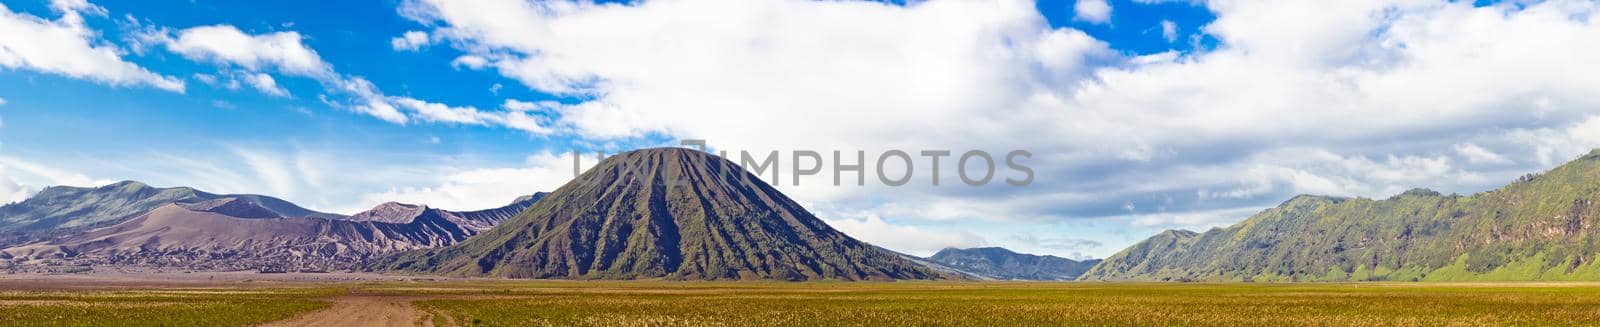 Panoramic view of volcanic landscape against blue sky with clouds. Bromo Tengger Semeru National Park, East Java, Indonesia